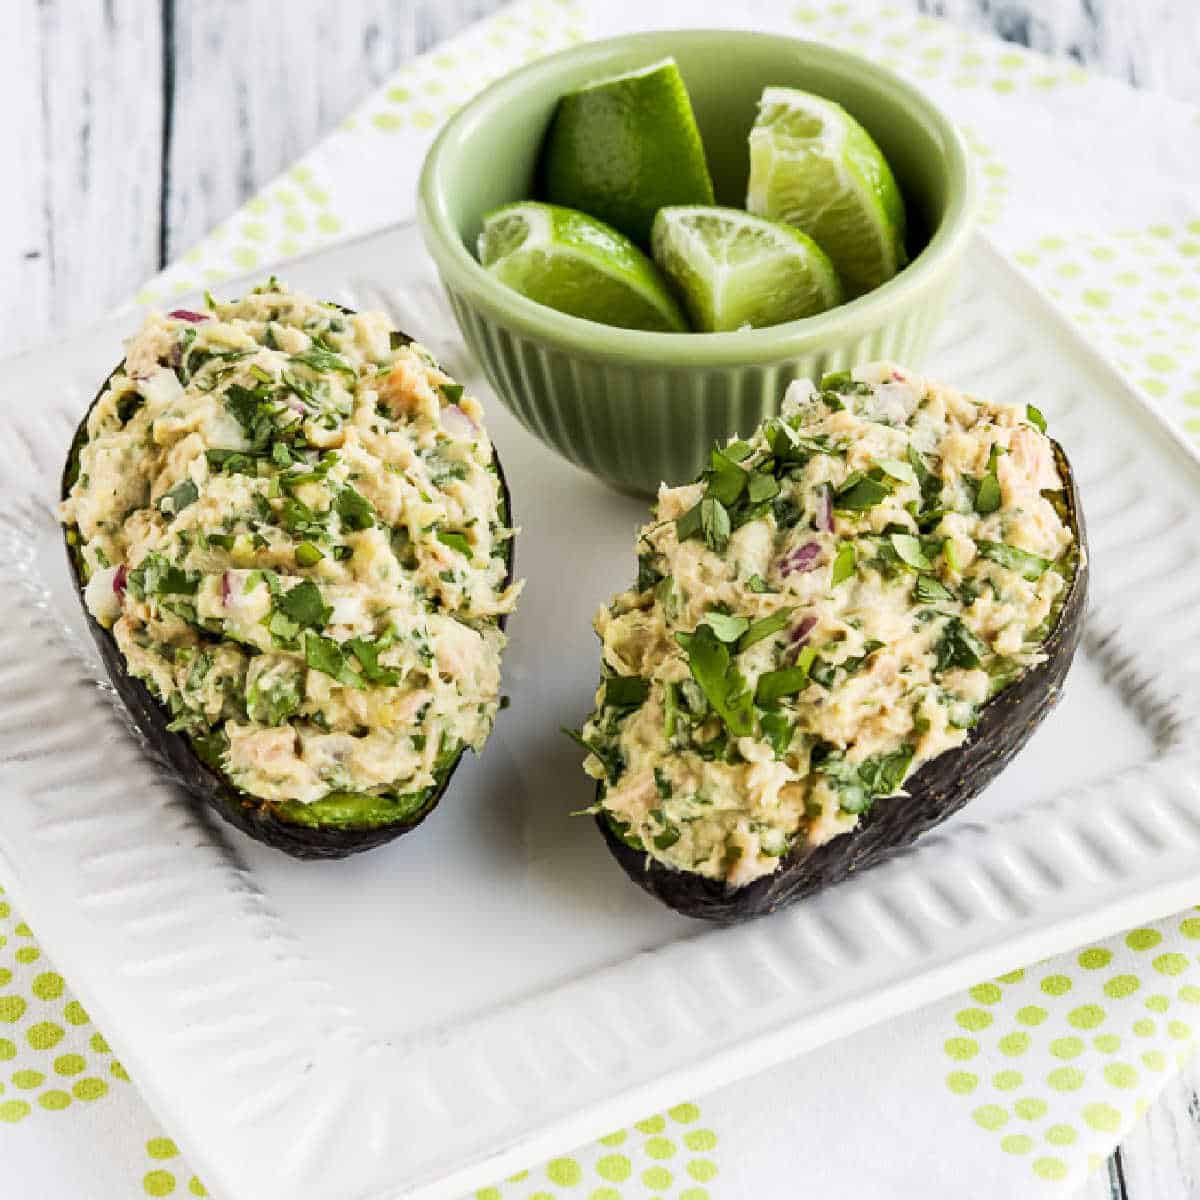 square image of Tuna Stuffed Avocado on serving plate with limes